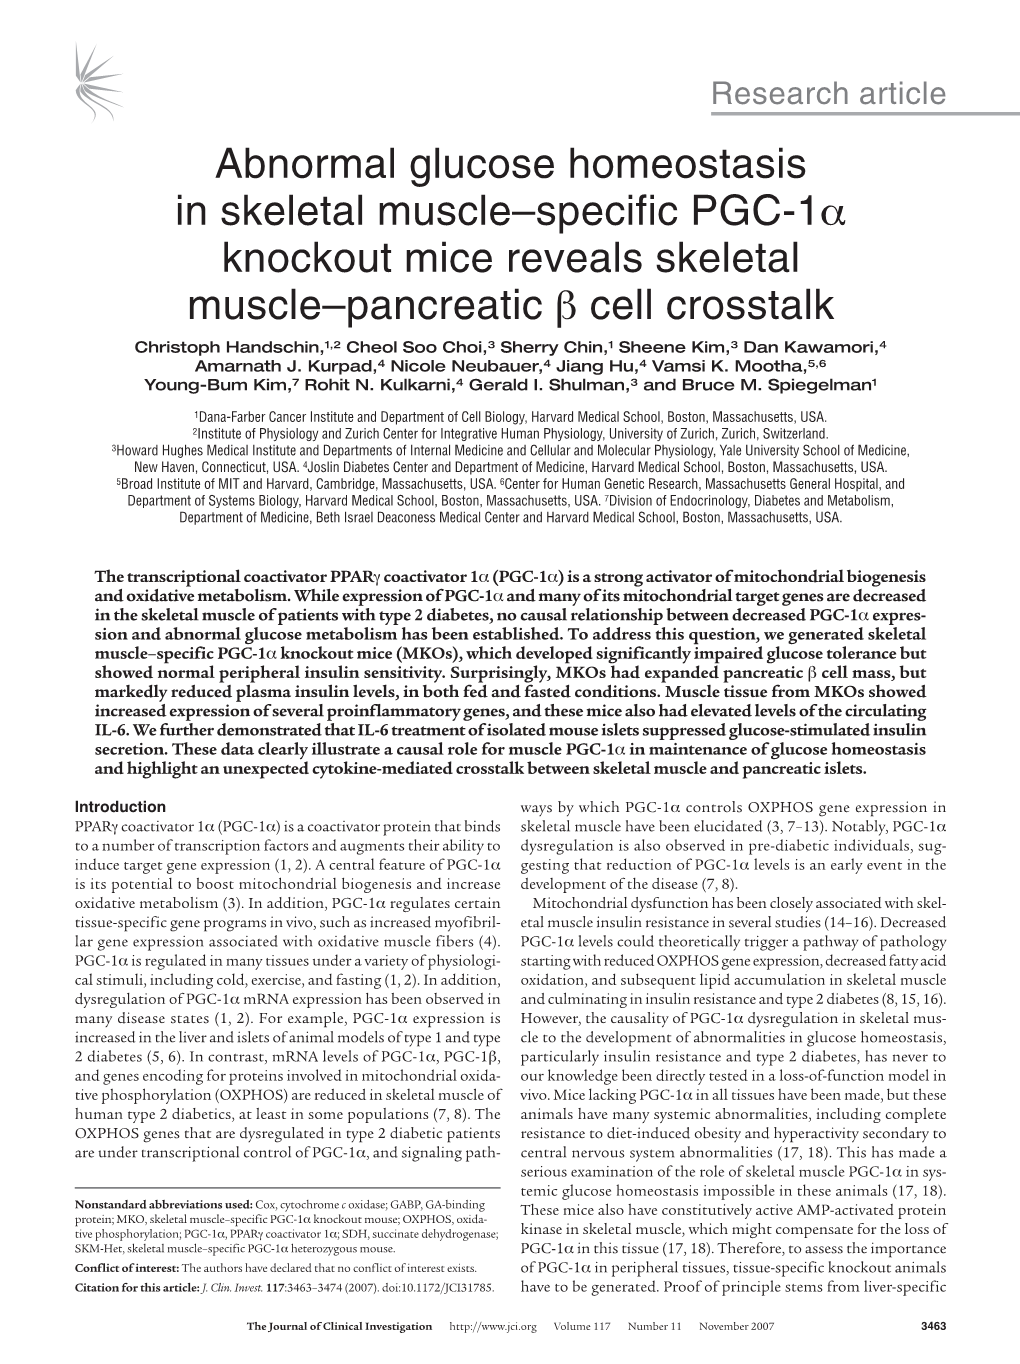 Abnormal Glucose Homeostasis in Skeletal Muscle–Specific PGC-1Α